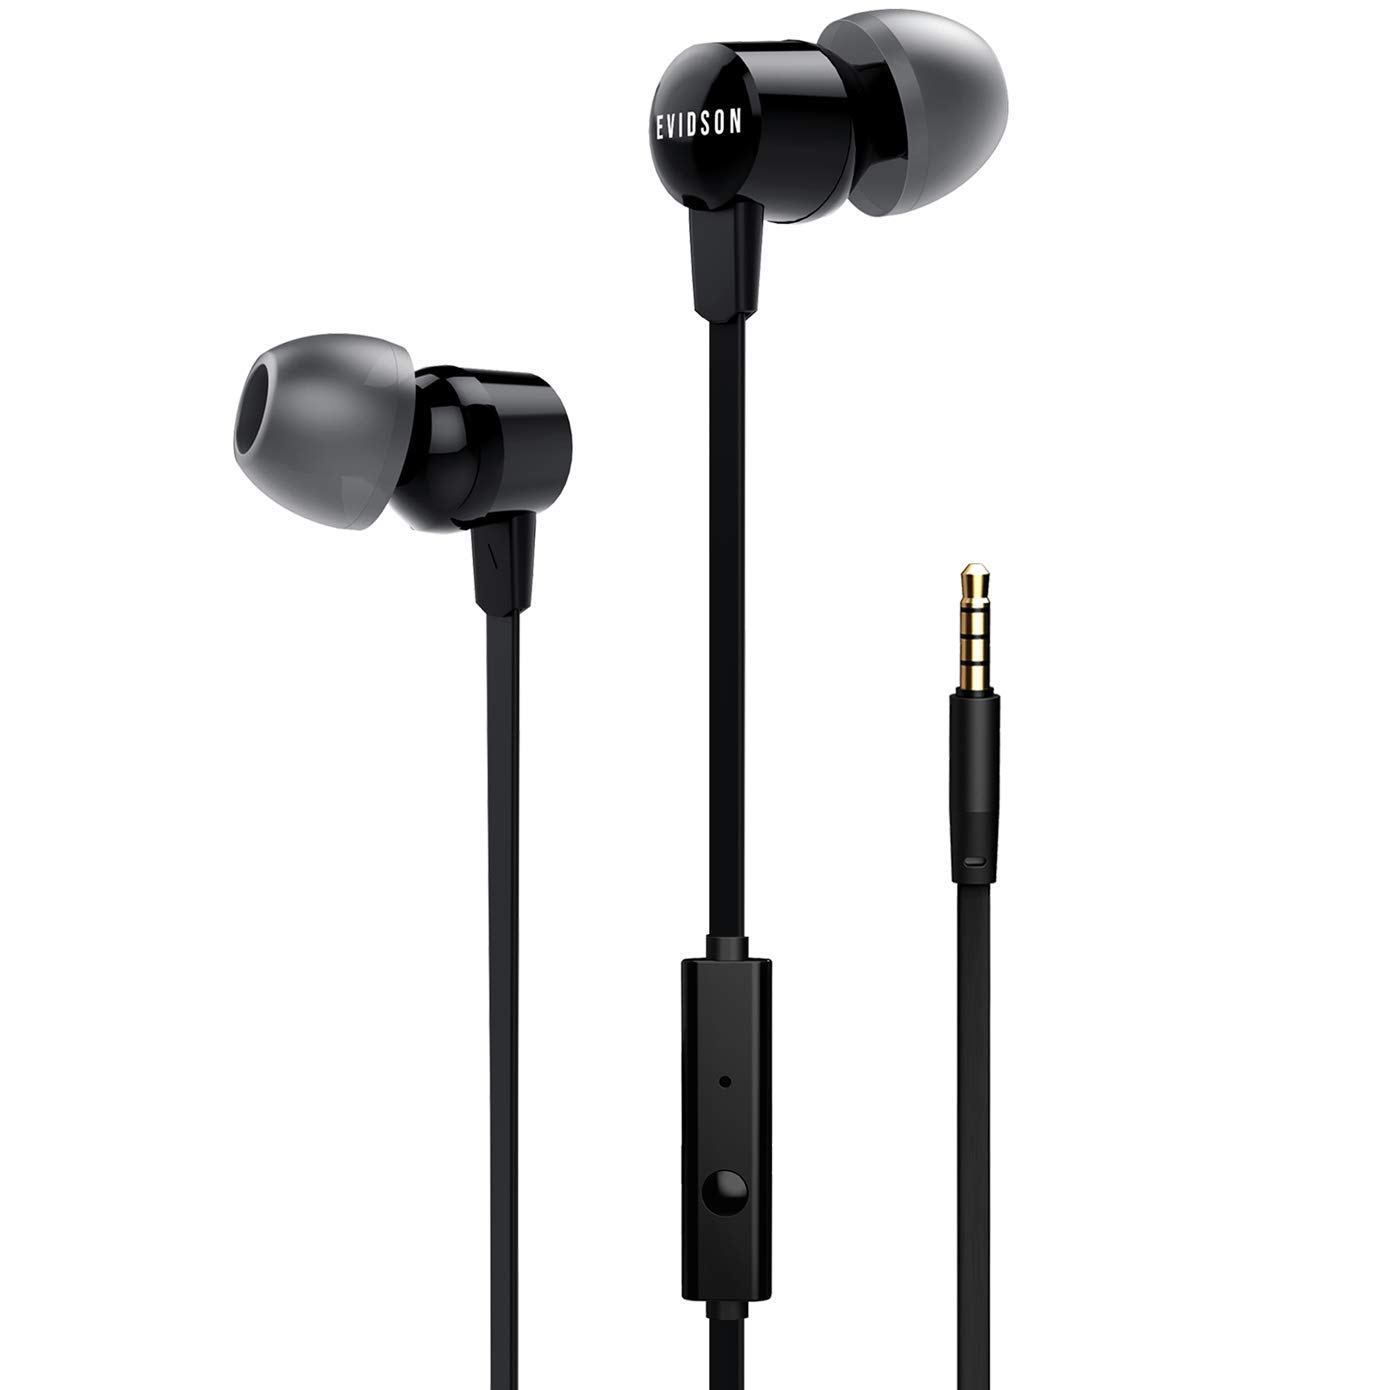 Evidson Vibe Black in-Ear Wired Earphone with Mic